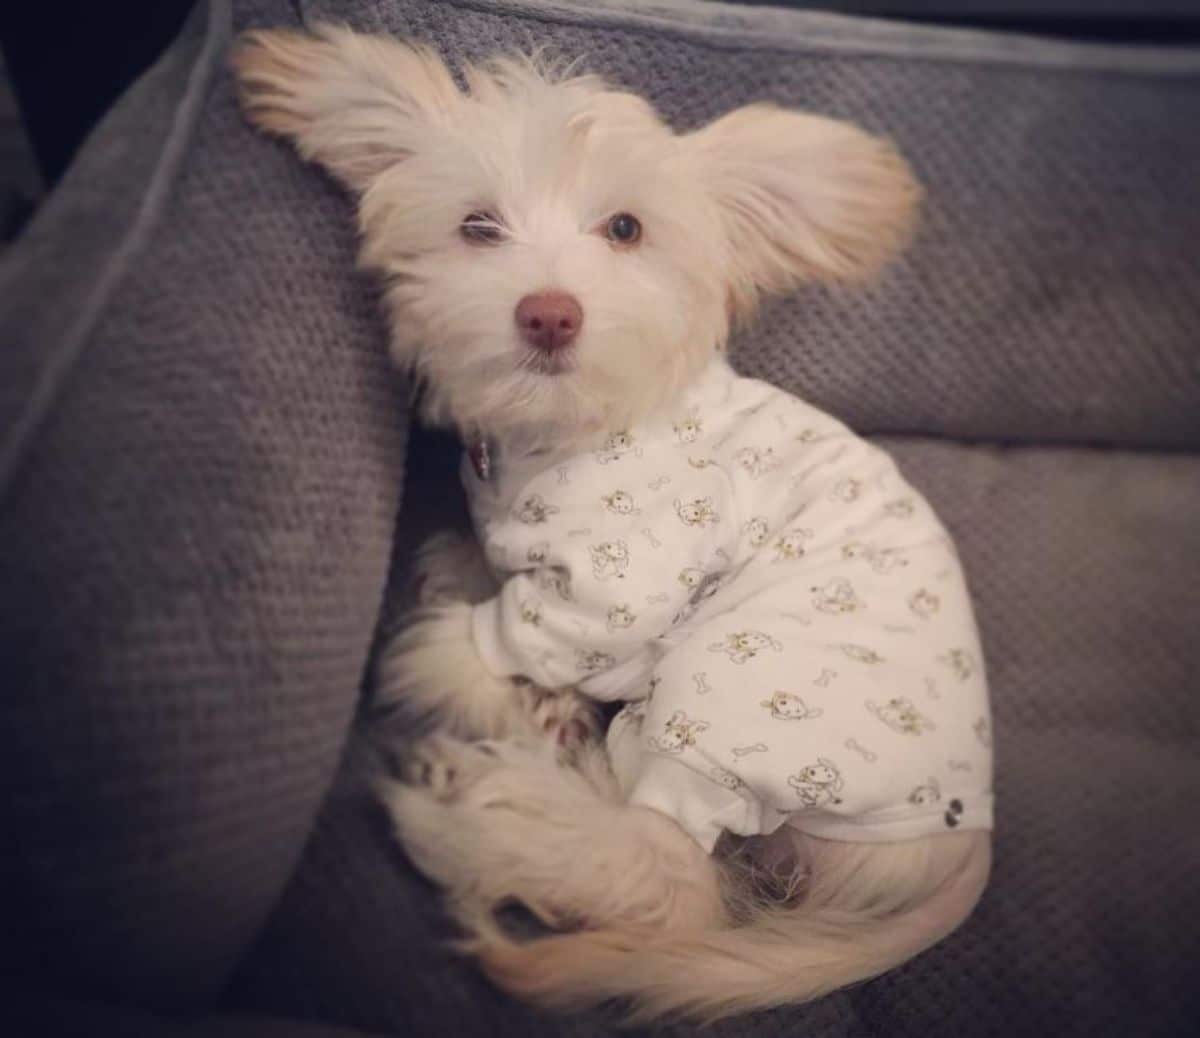 fluffy white dog wearing a white onesie with black patterns on it